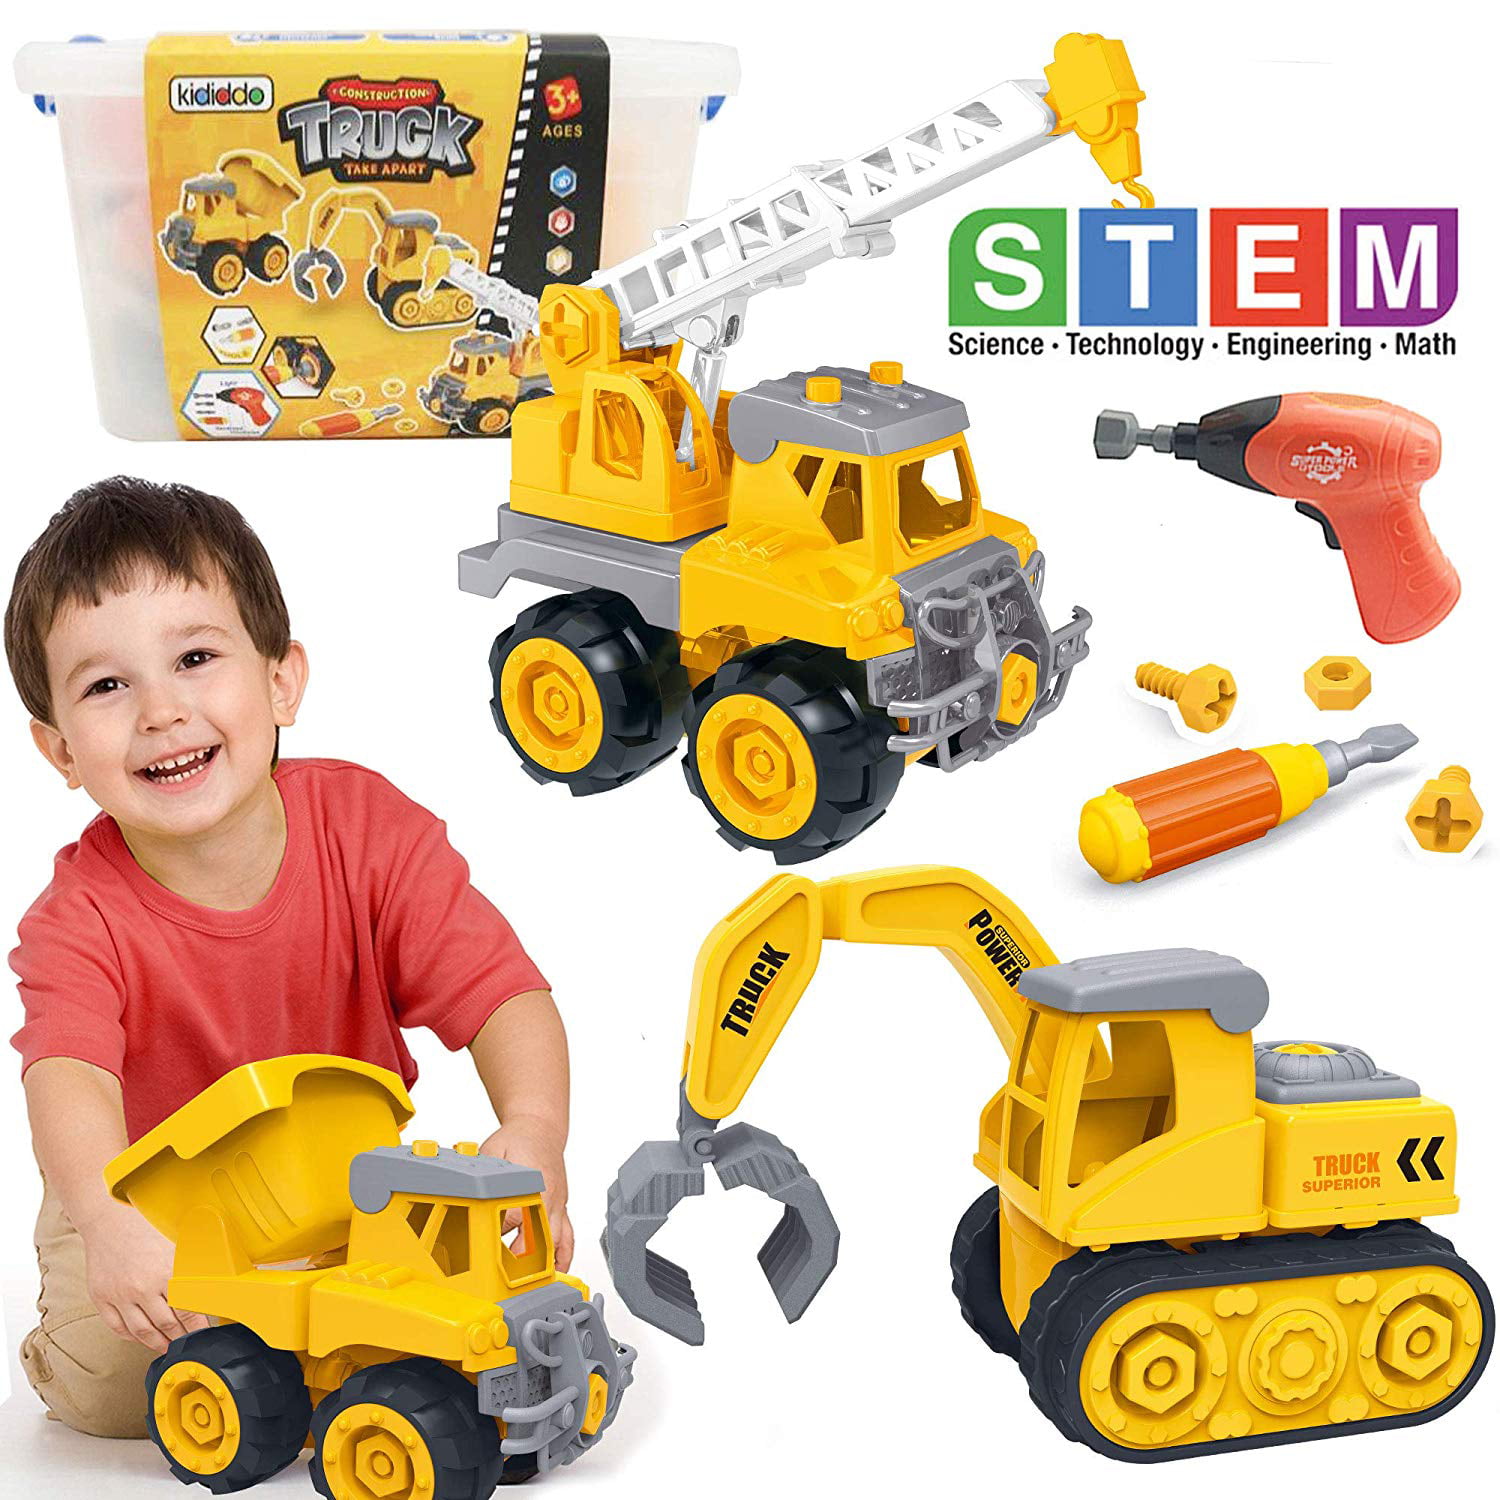 Construction Truck for Kids FUN LITTLE TOYS Take Apart Truck Toy Constructions Play Vehicles Set